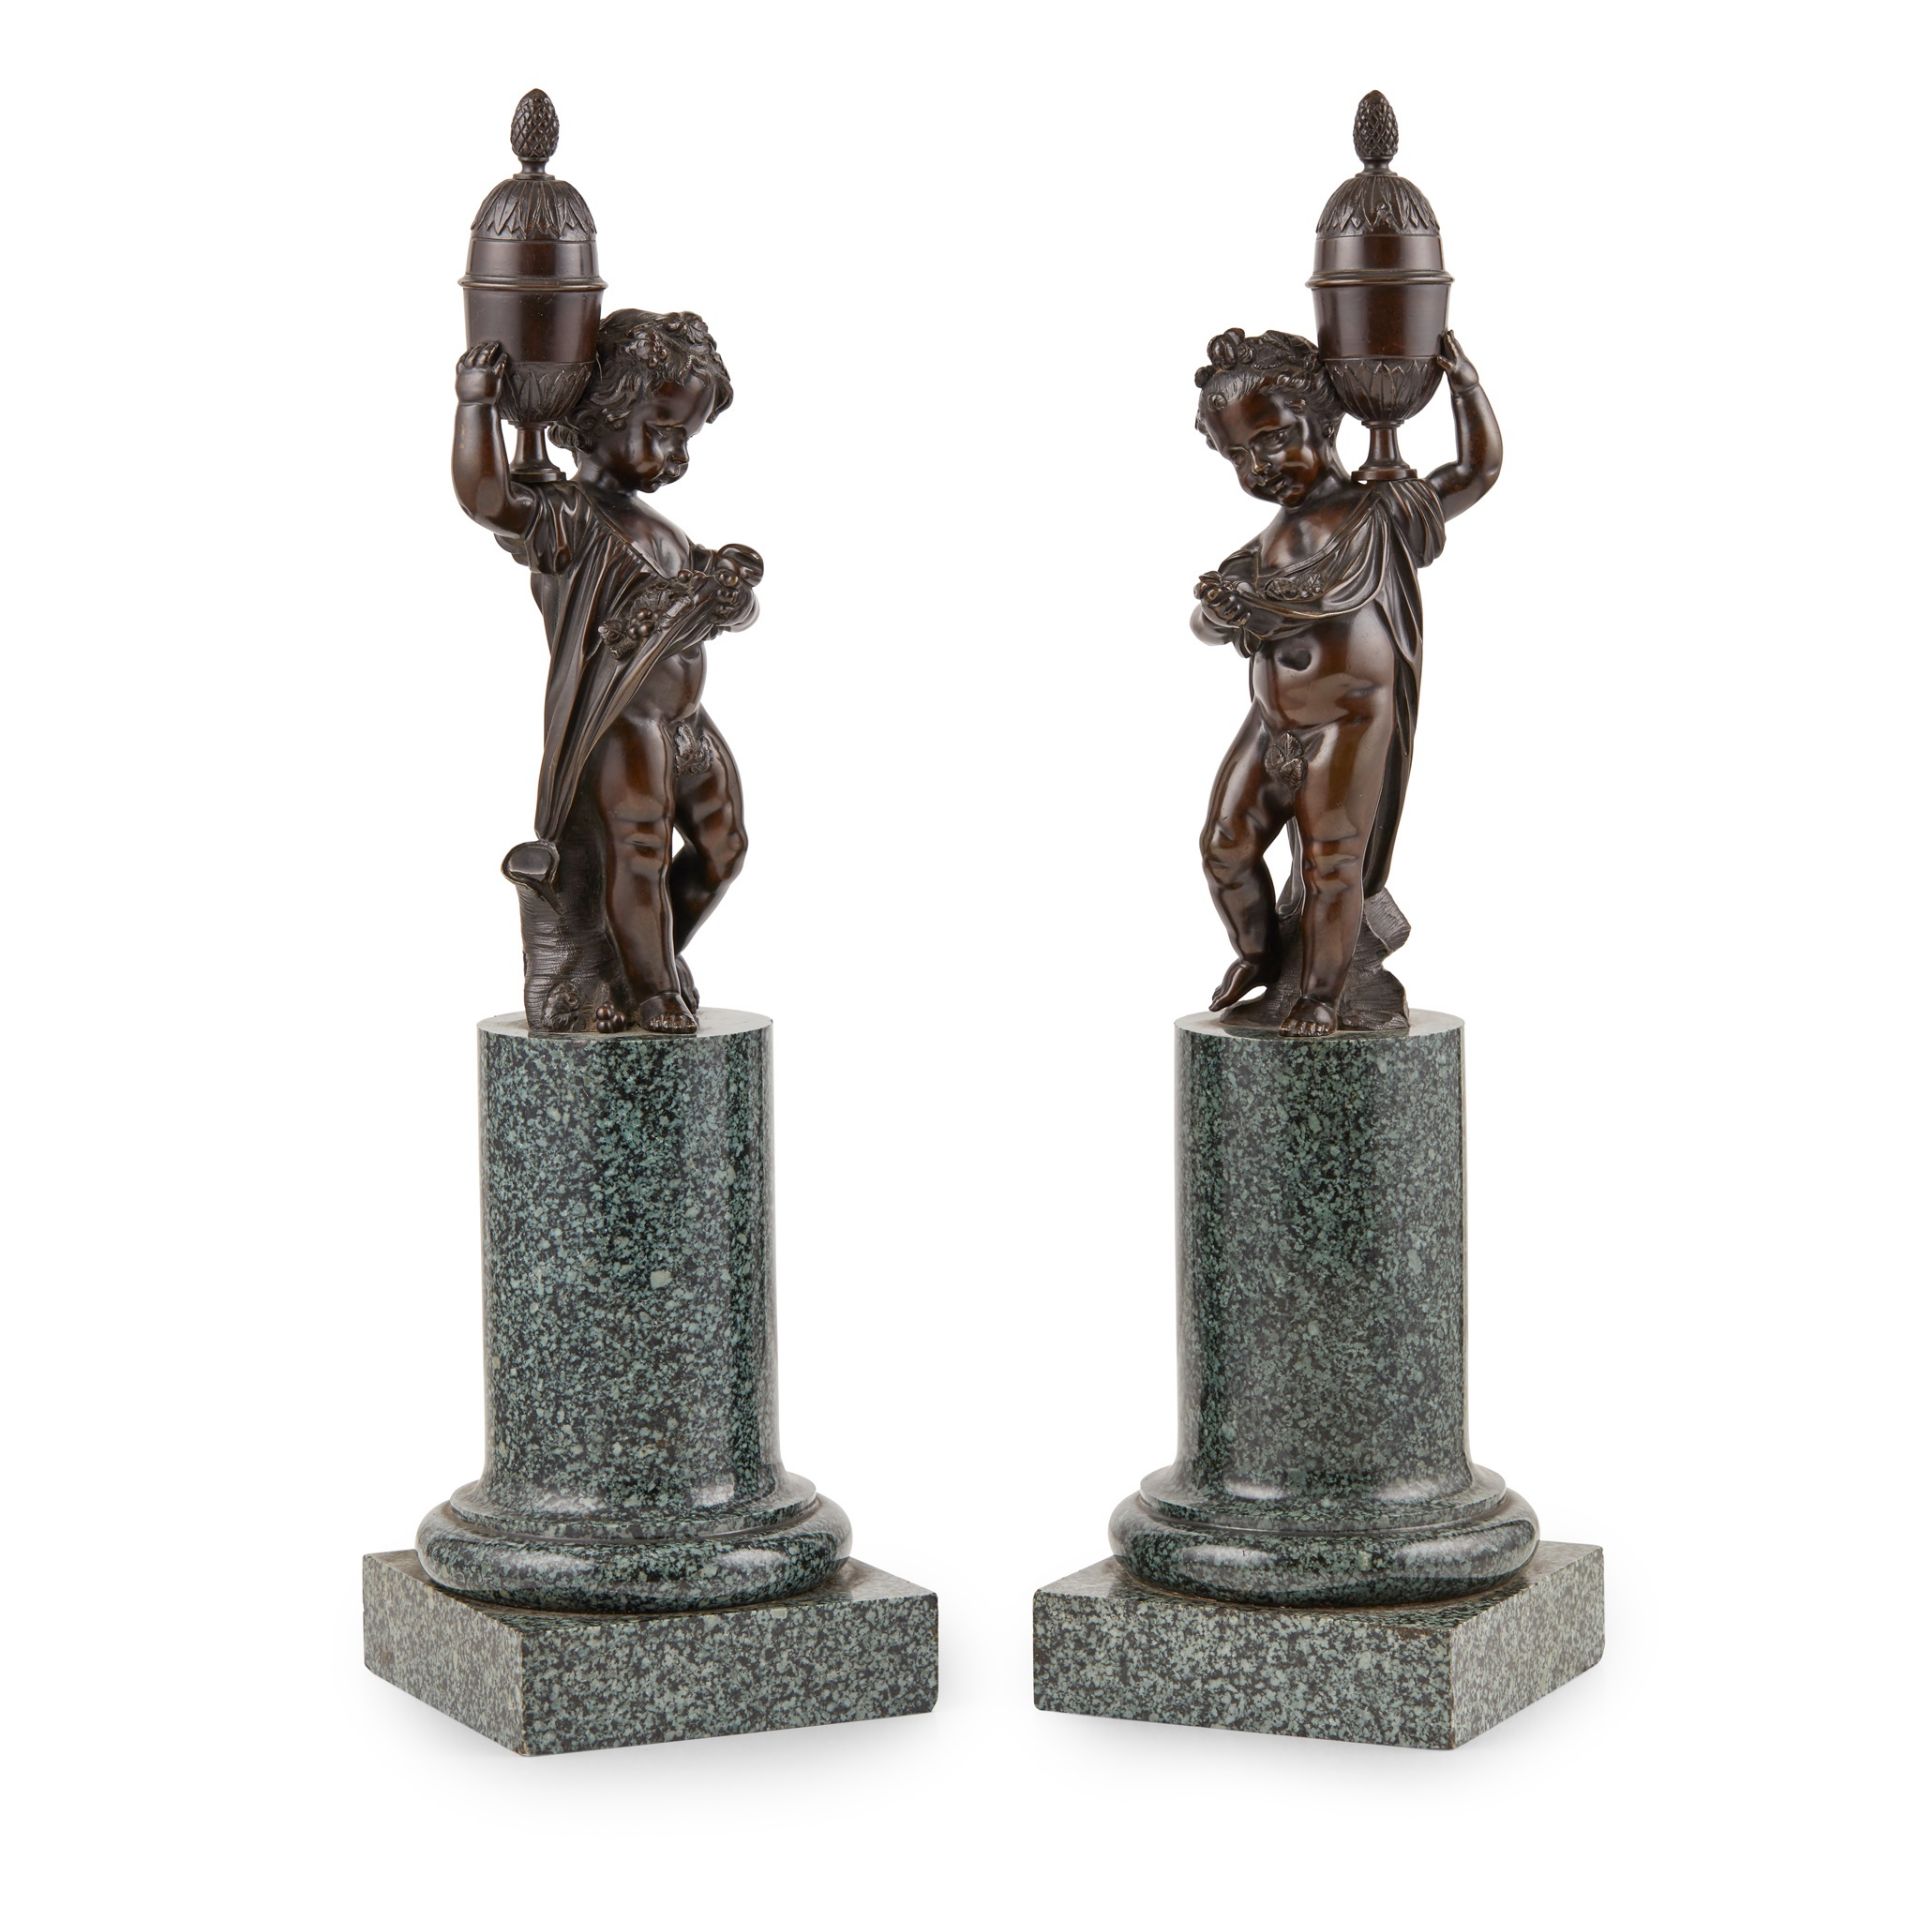 PAIR OF FRENCH BRONZE FIGURES OF PUTTI 19TH CENTURY